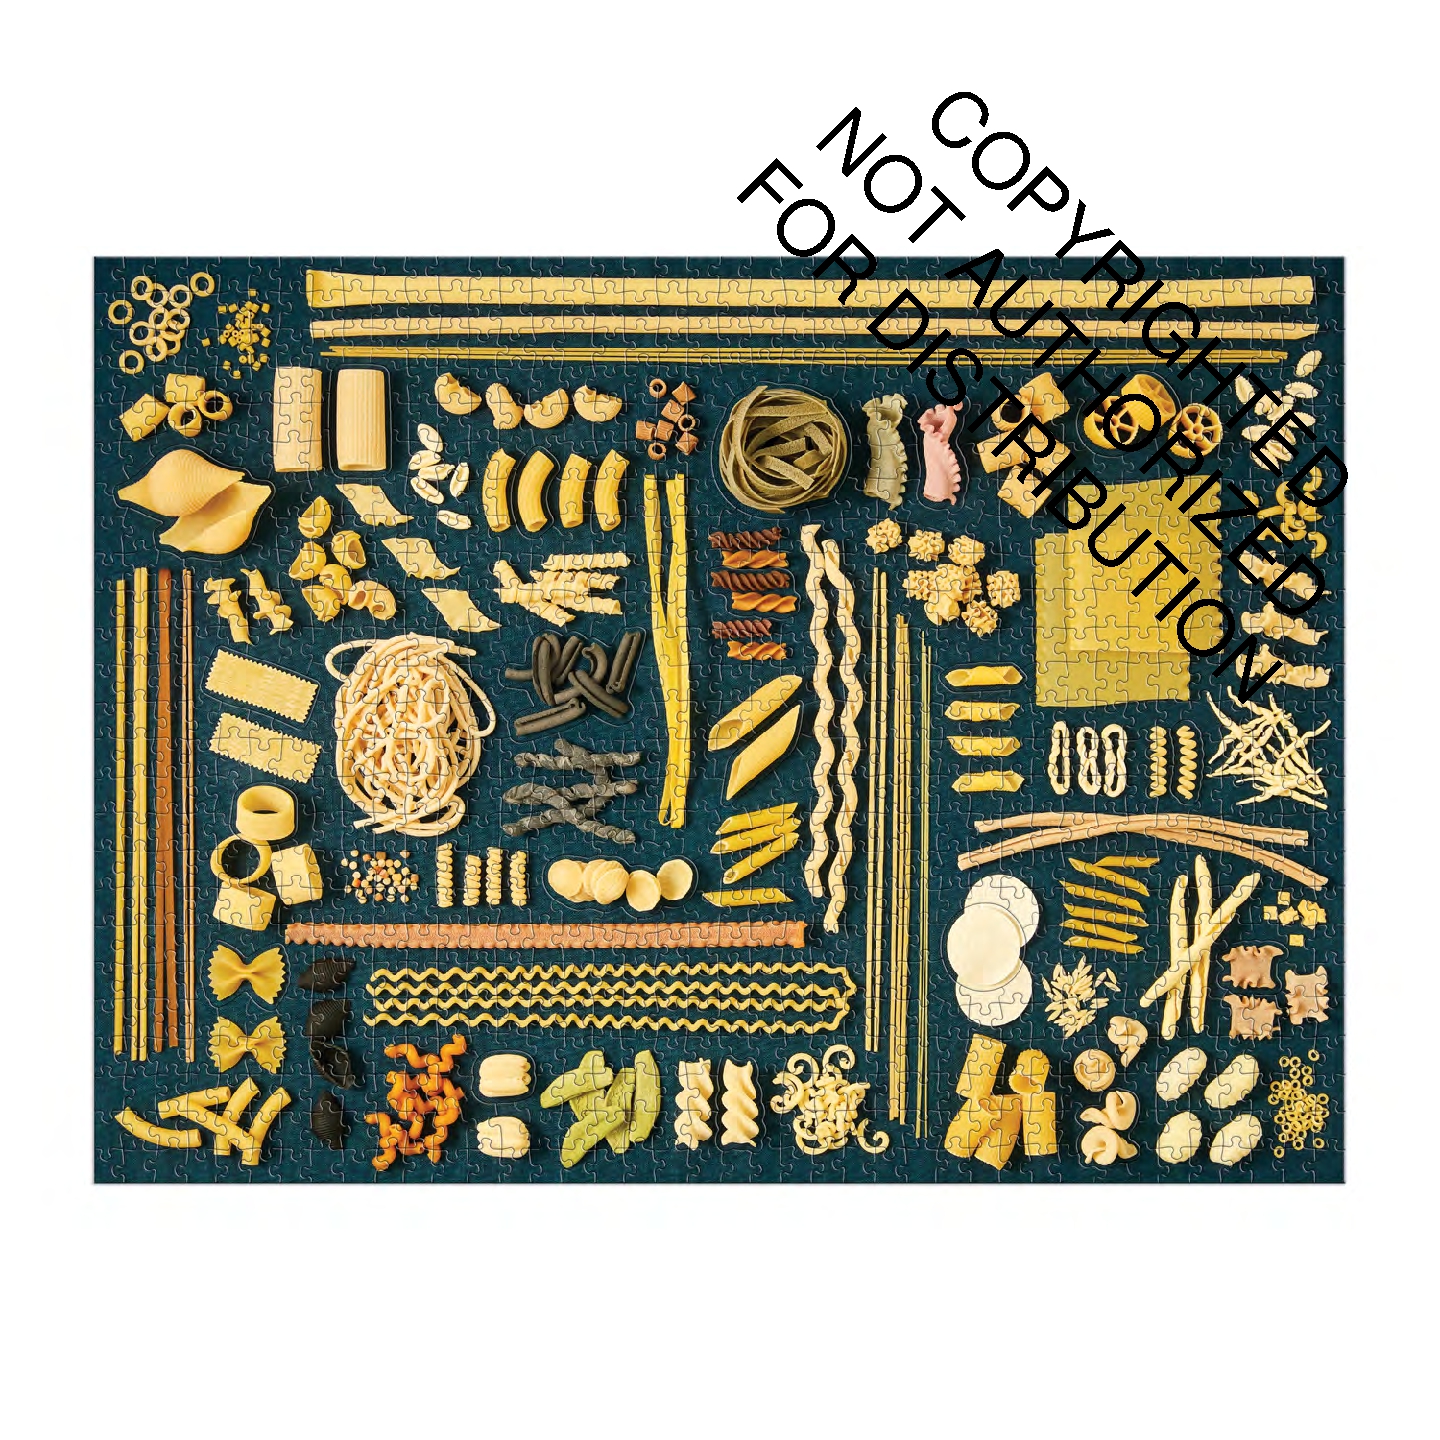 The Art of Pasta 1000 Piece Puzzle with Shaped Pieces